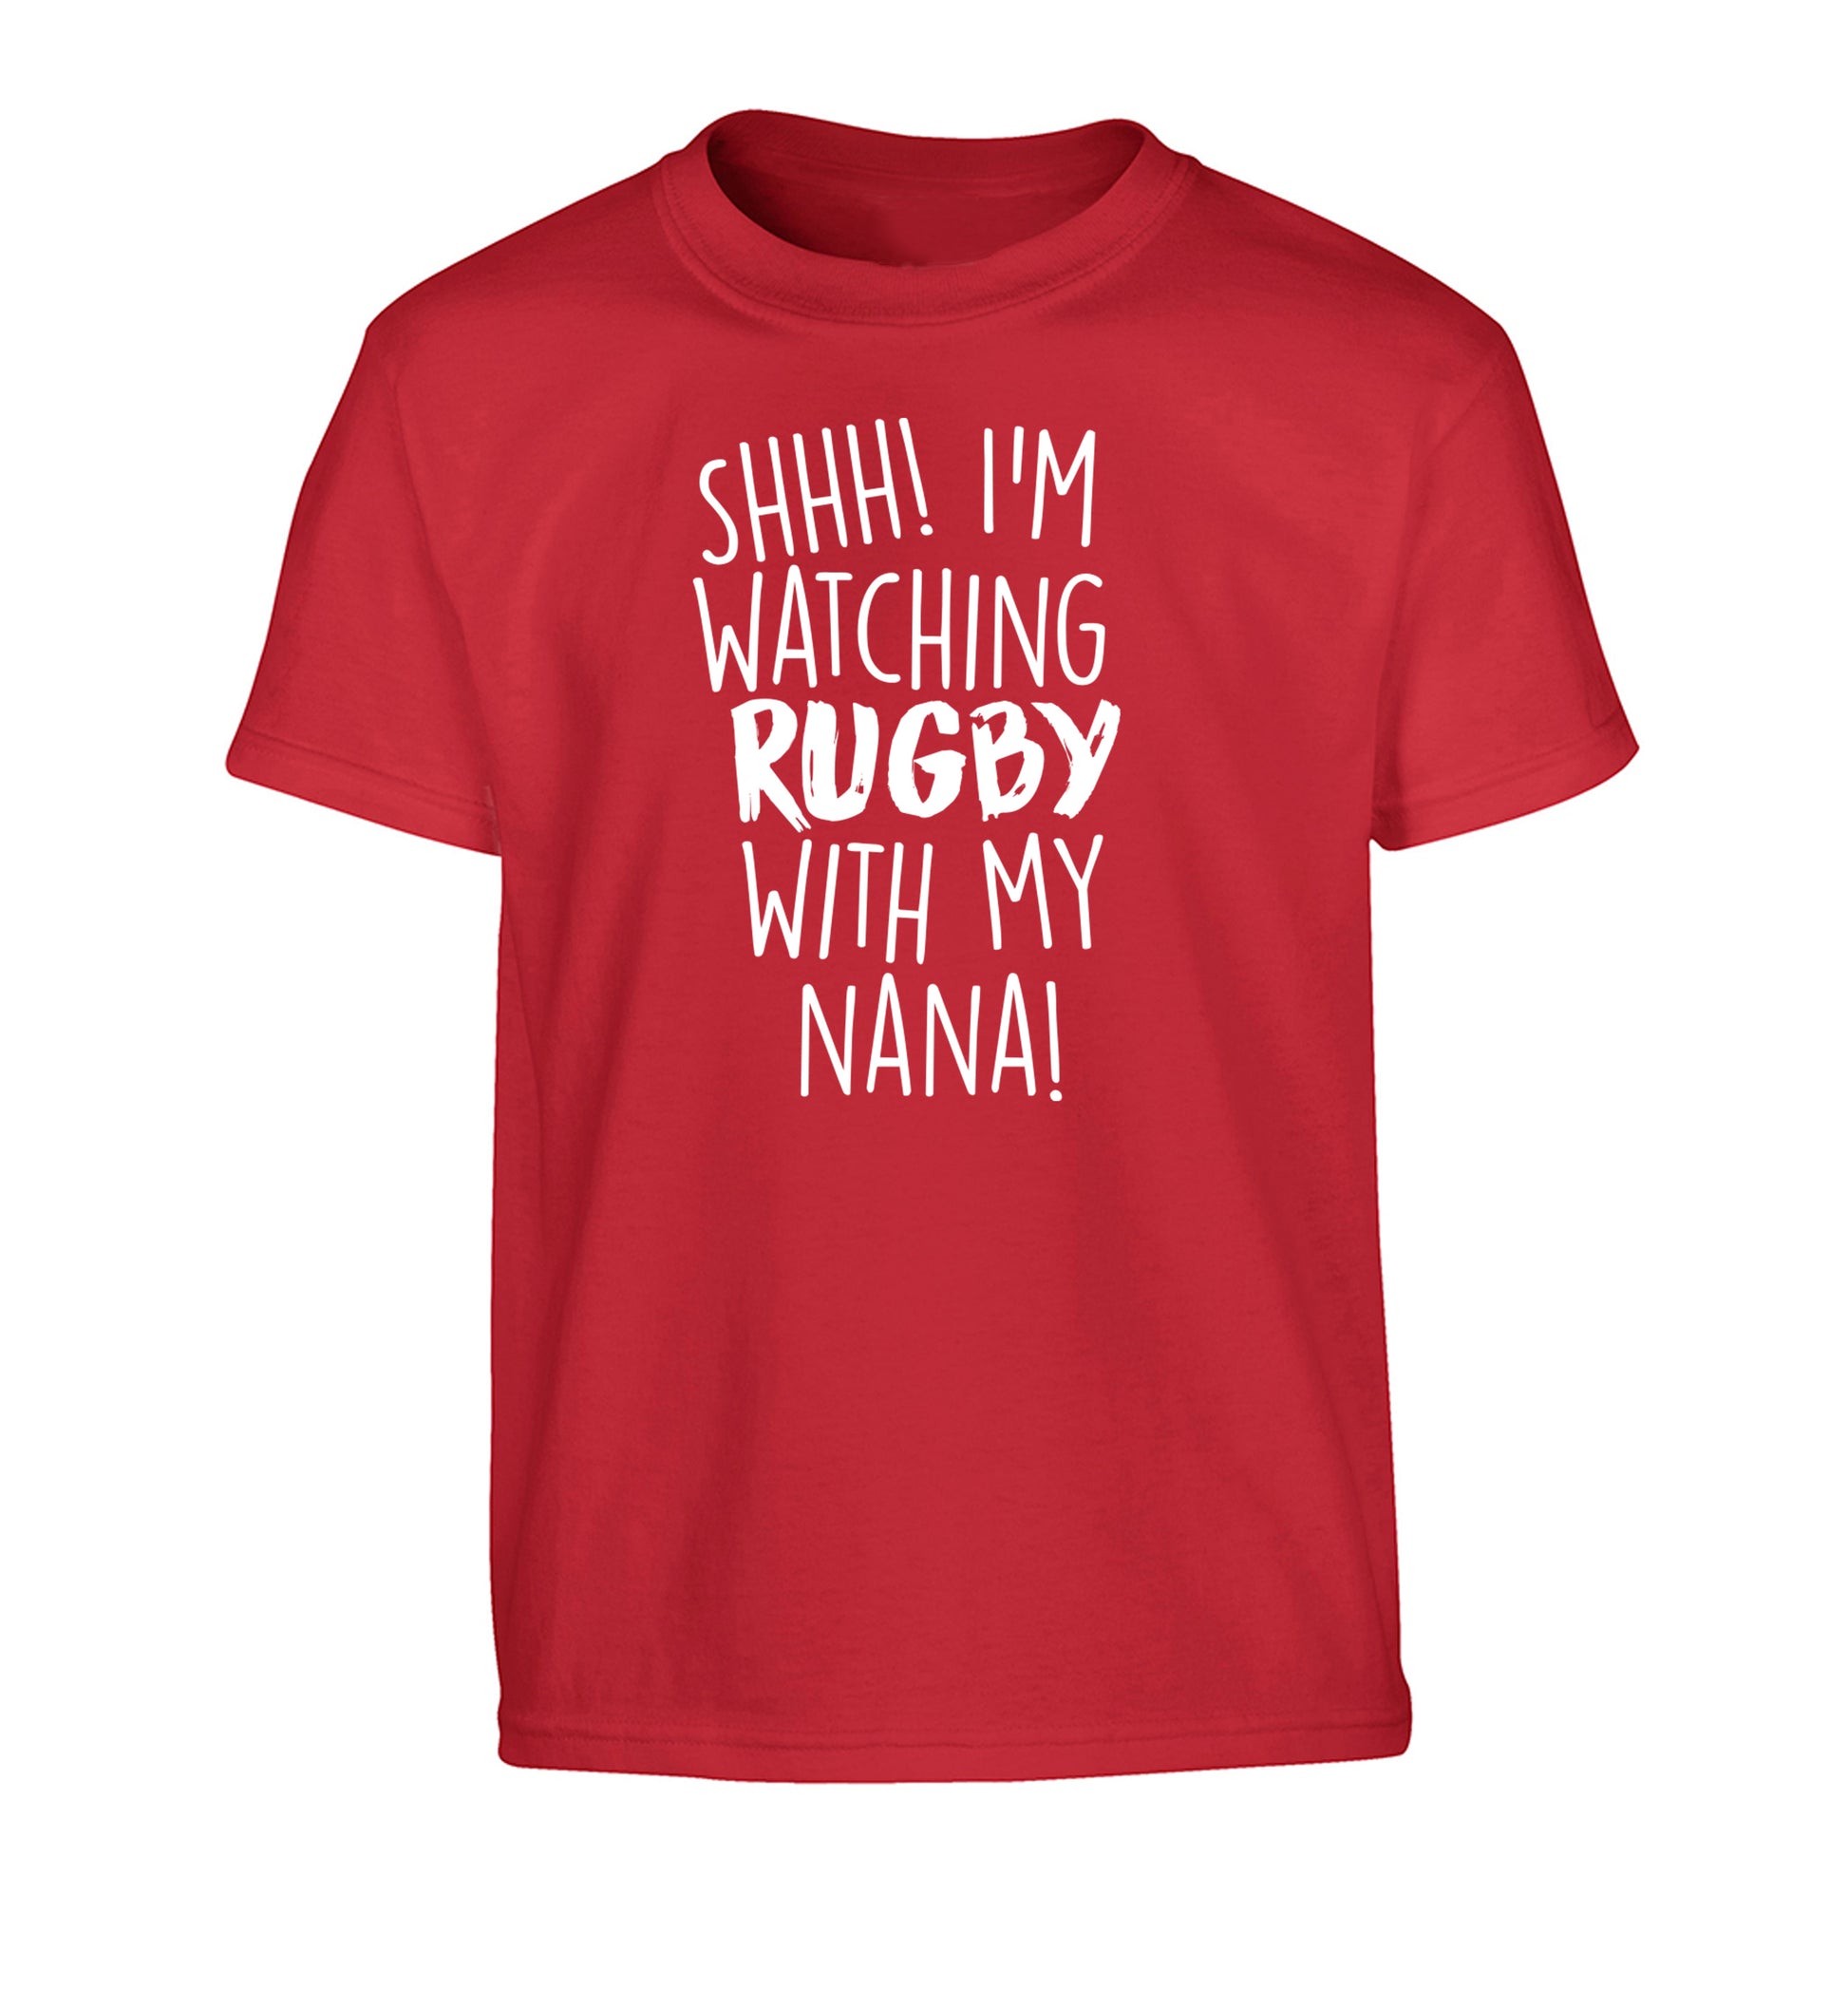 Shh I'm watching rugby with my nana Children's red Tshirt 12-13 Years